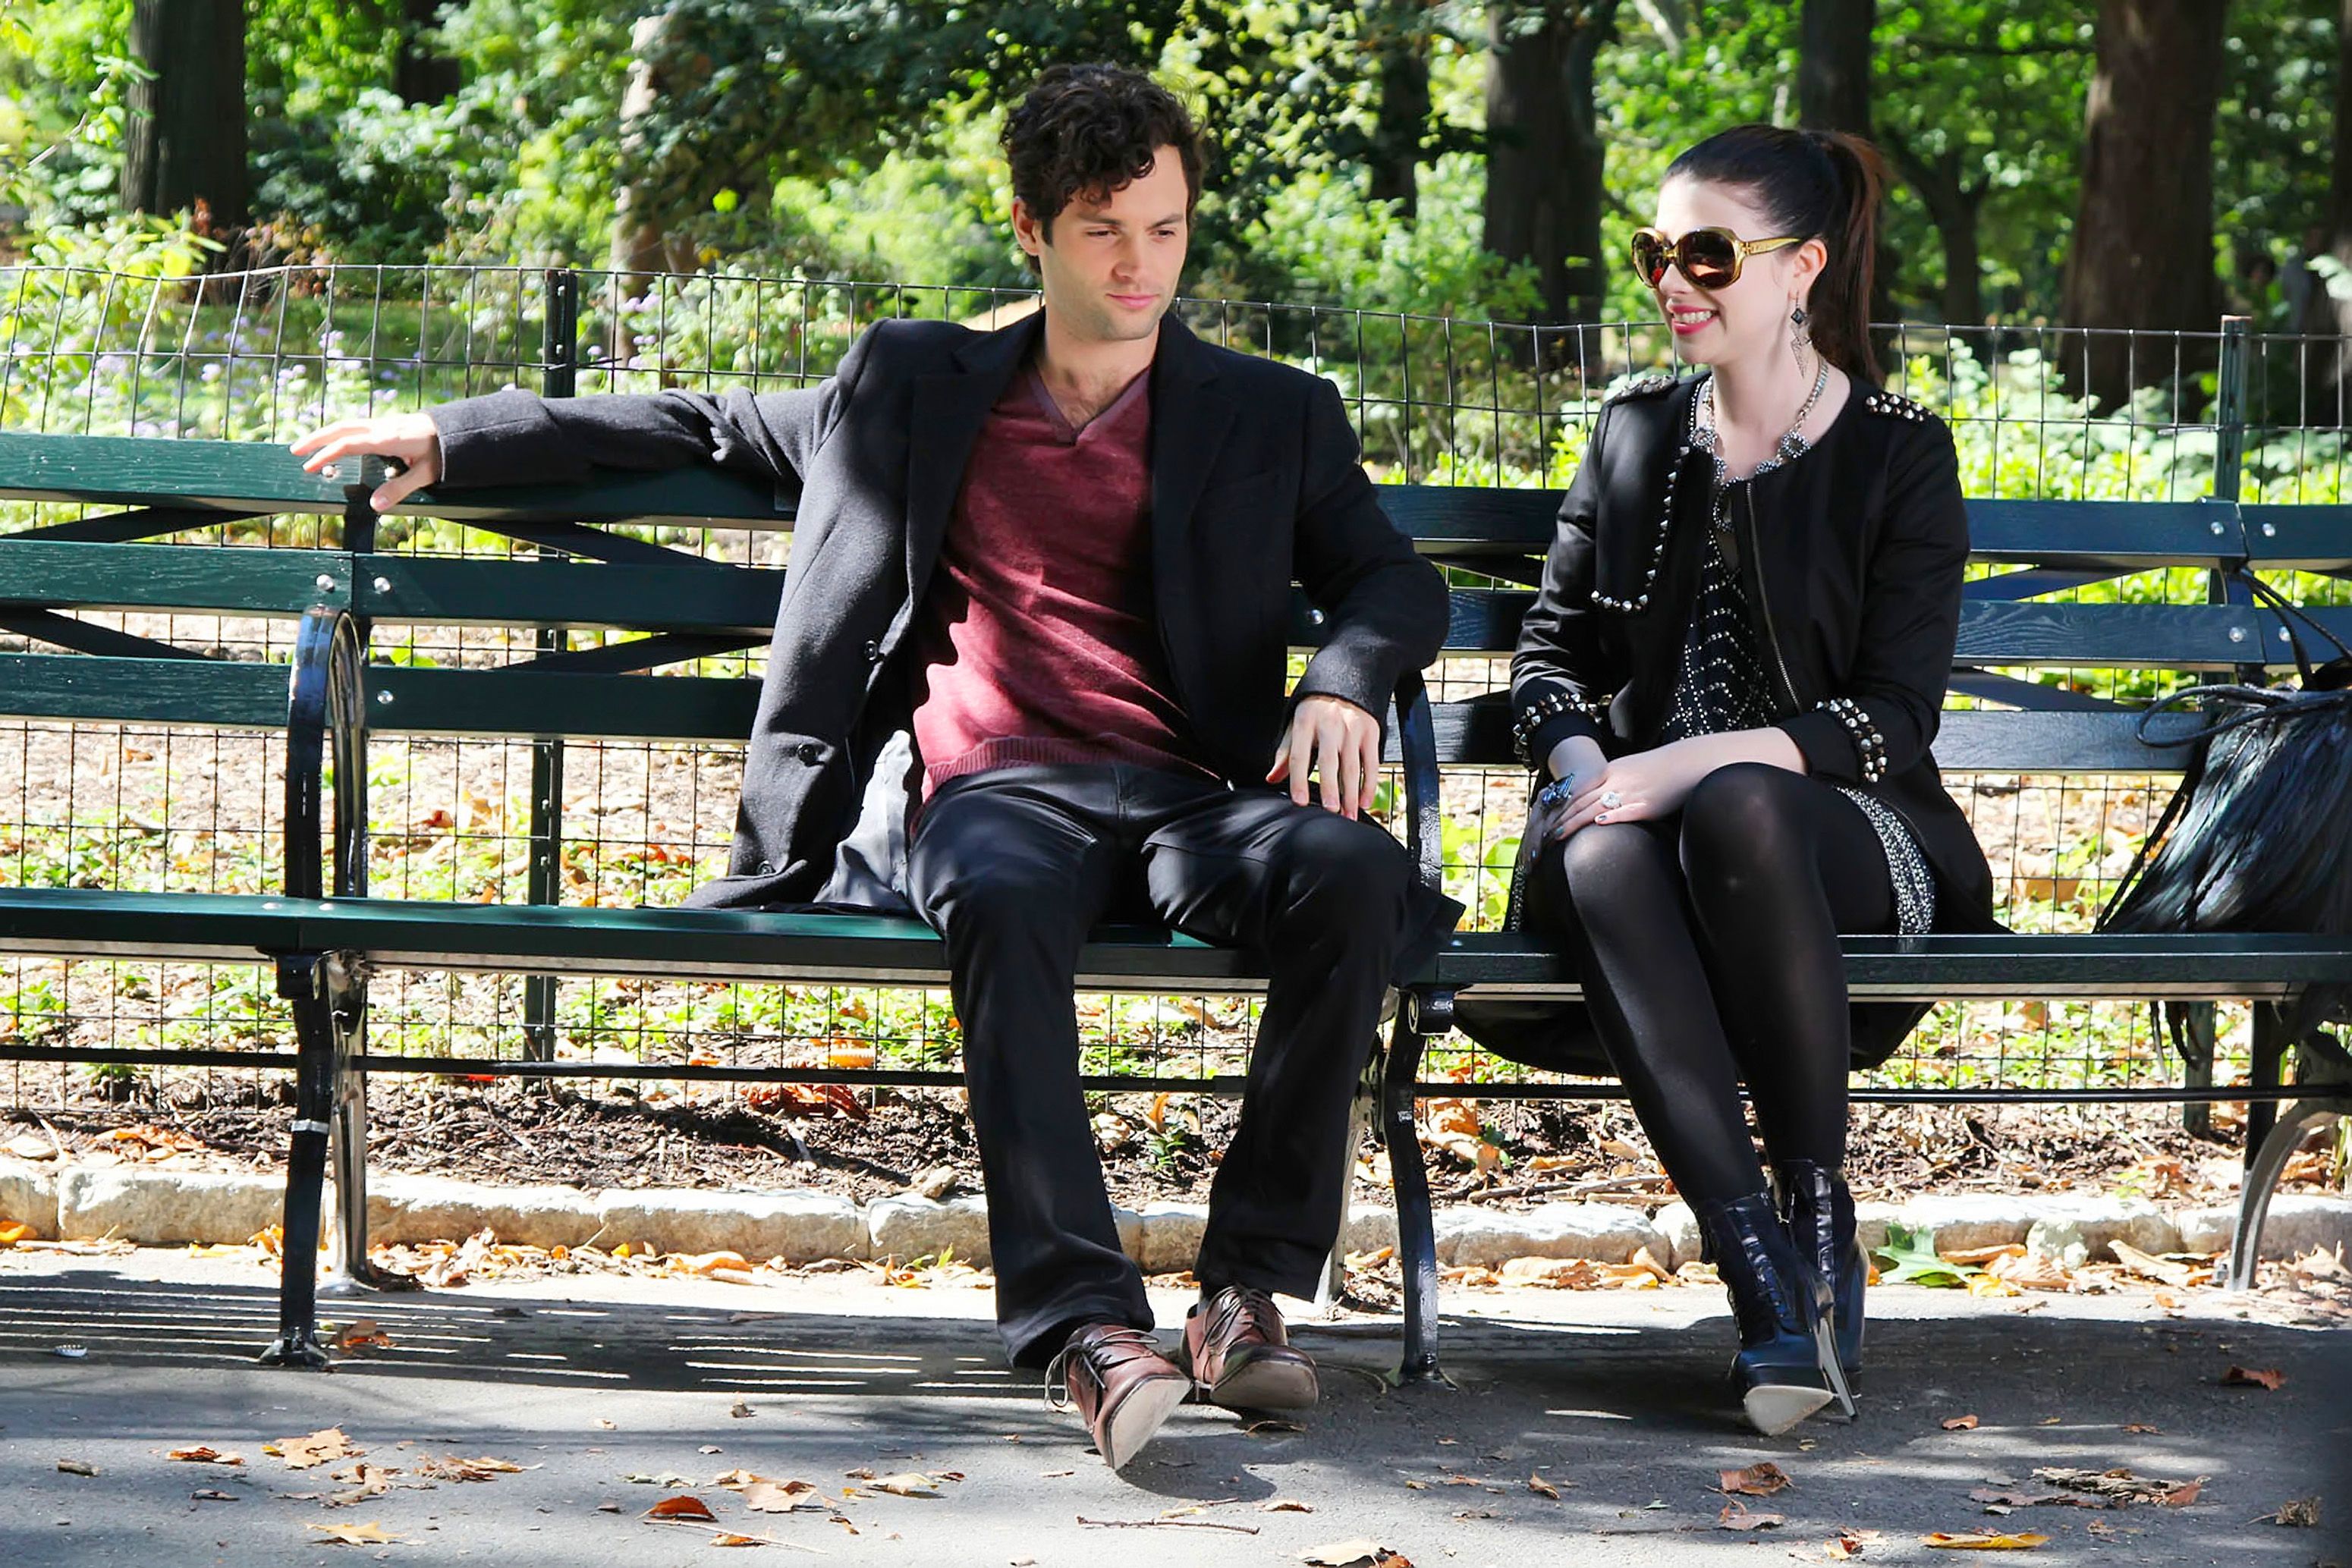 Get Ready for Drama and Intrigue in Gossip Girl Season 3